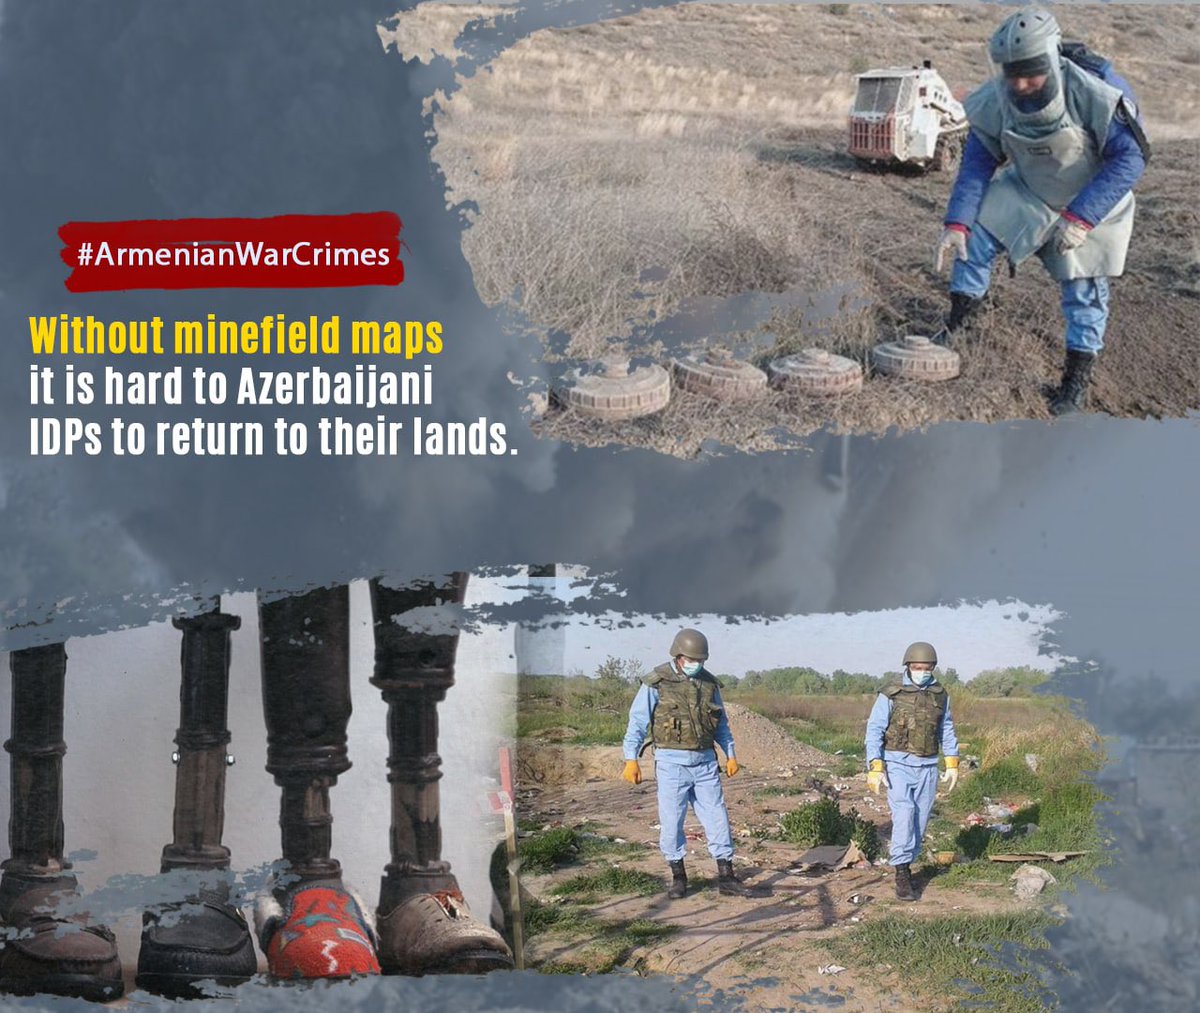 An estimated $340 million worth of landmines have been planted in #Azerbaijan’s #Karabakh region, and the #Armenia'n government refuses to provide the available mine maps despite international calls for their release. #FreeUsFromLandmines #ArmenianWarCrimes #MineAwarenessDay